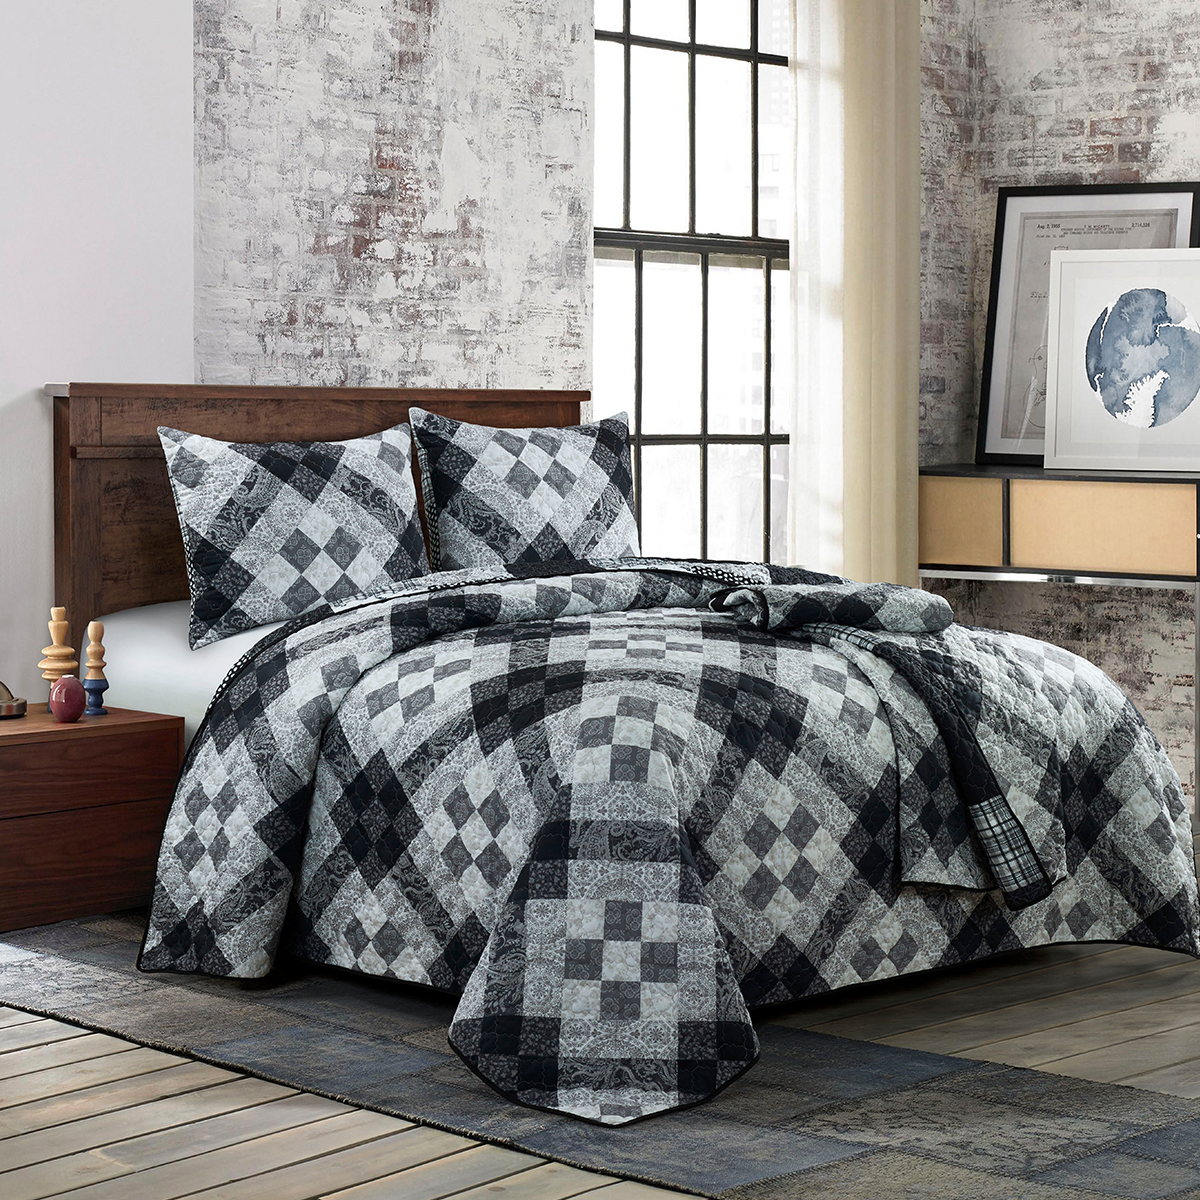 Donna Sharp London Farmhouse Country Quilted Collection